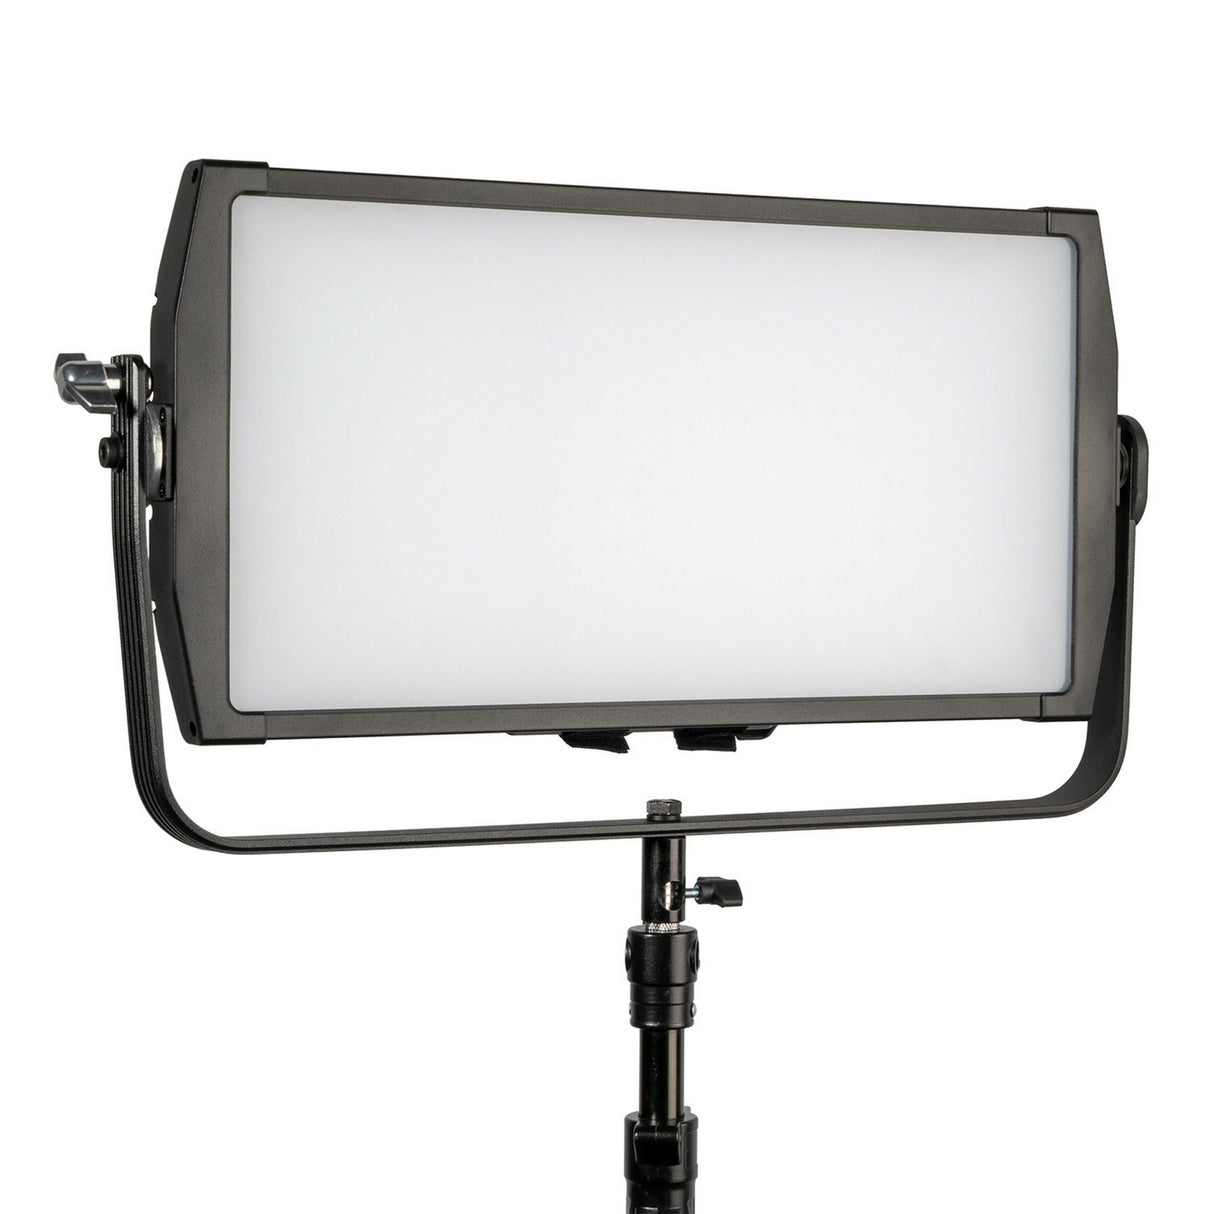 Ikan OYC15-V2 Onyx Digital Color LED 1 x 2 Soft Light with Tuneable RGBWA Color Control